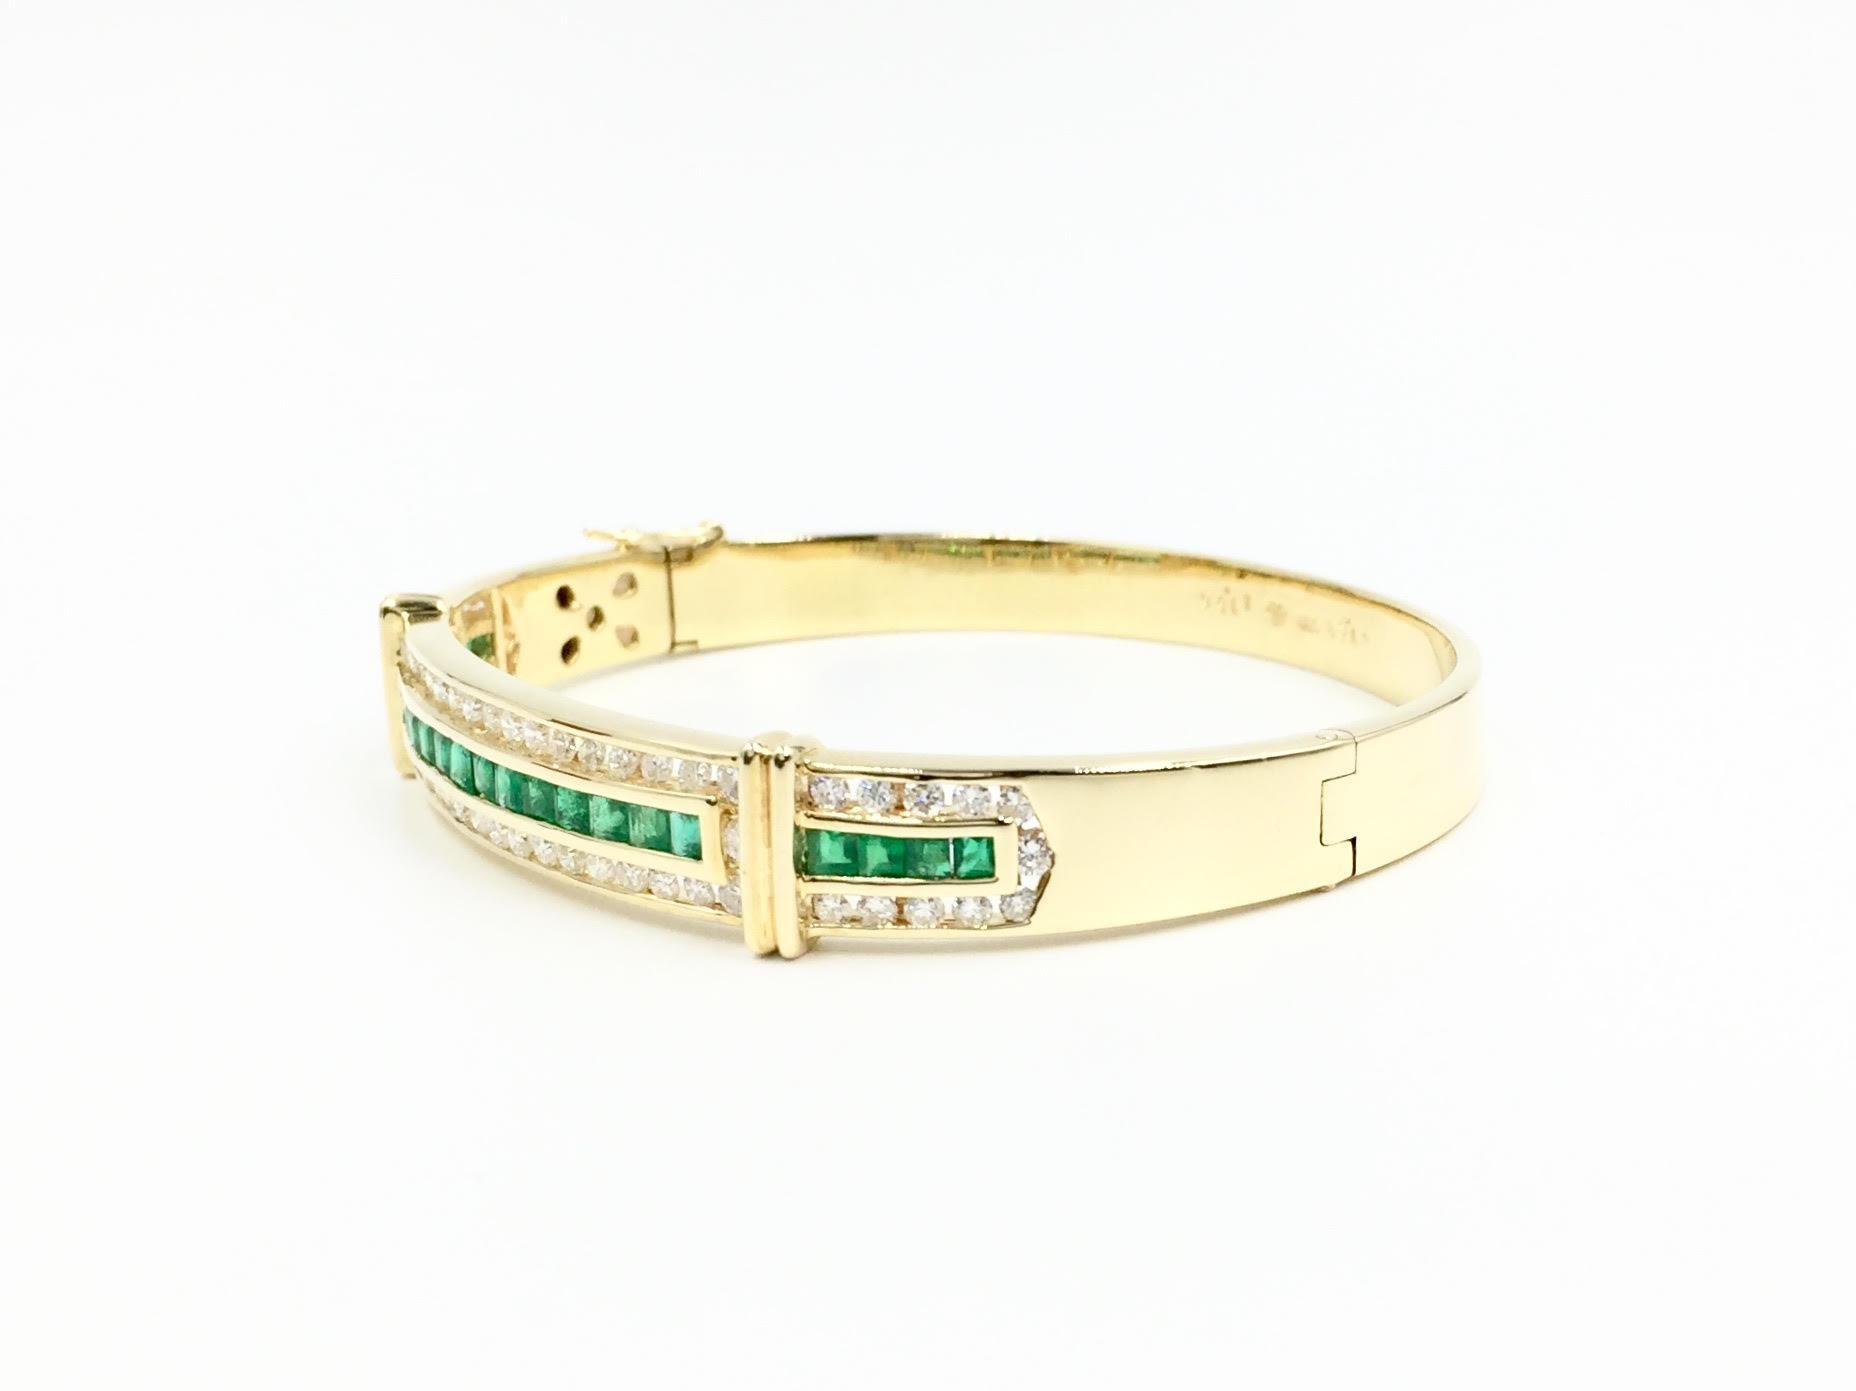 This 18 karat yellow gold emerald and diamond oval shaped bangle bracelet features 1.63 carats of bright round brilliant diamonds and 1.66 carats of vibrant genuine emeralds. Diamonds have an approximate color and clarity of F, VS2. Bracelet has a